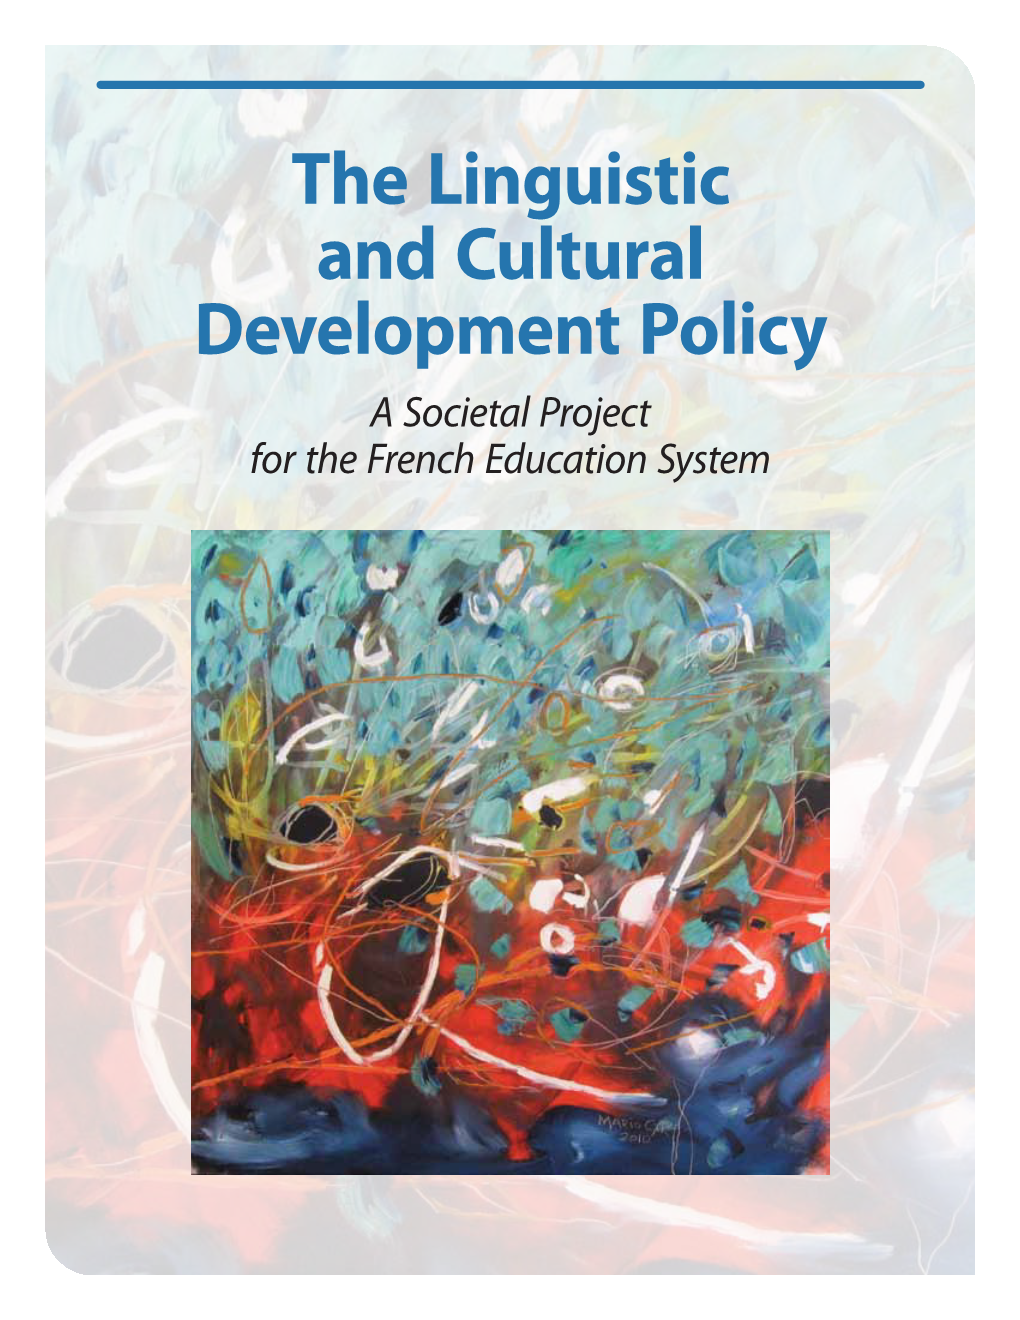 The Linguistic and Cultural Development Policy a Societal Project for the French Education System on the Cover: Mario Cyr, Construire L’Identité, 2010